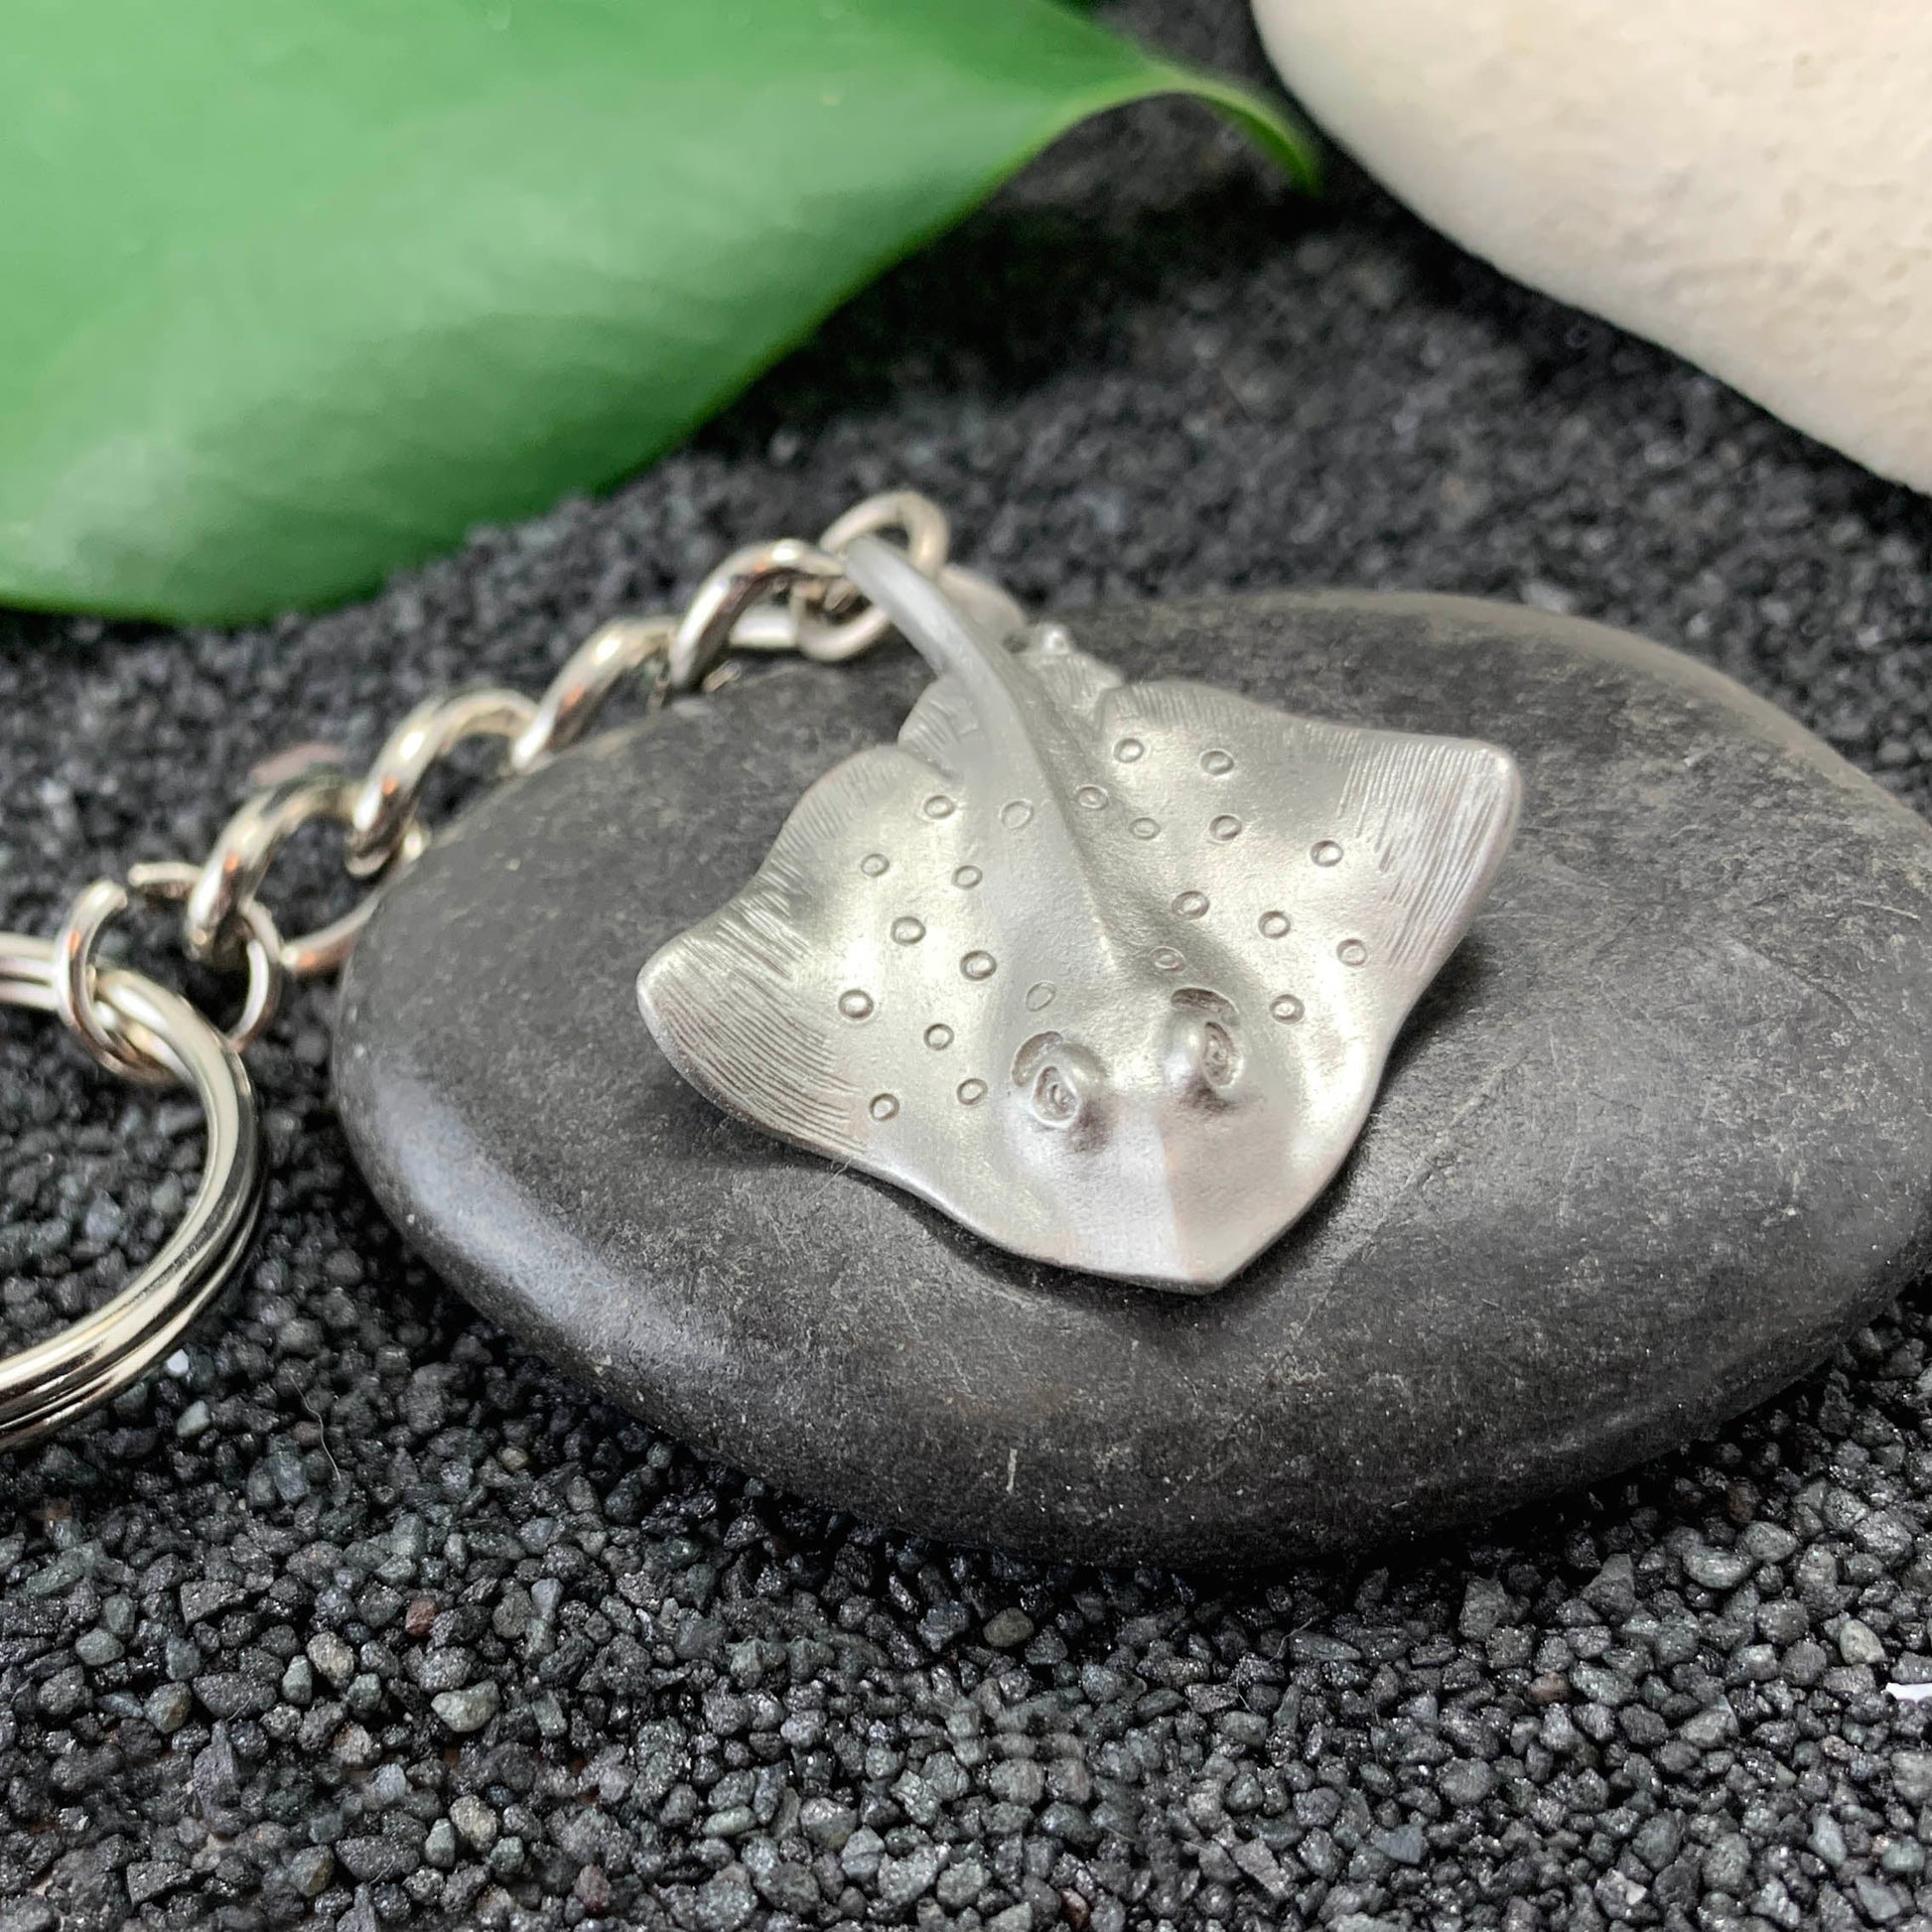 Stingray Keychain for Women and Men- Stingray Gifts for Women, Stingray Key Ring, Stingray Charm, Gifts for Scuba Divers, Sea Life Keychain - The Tool Store